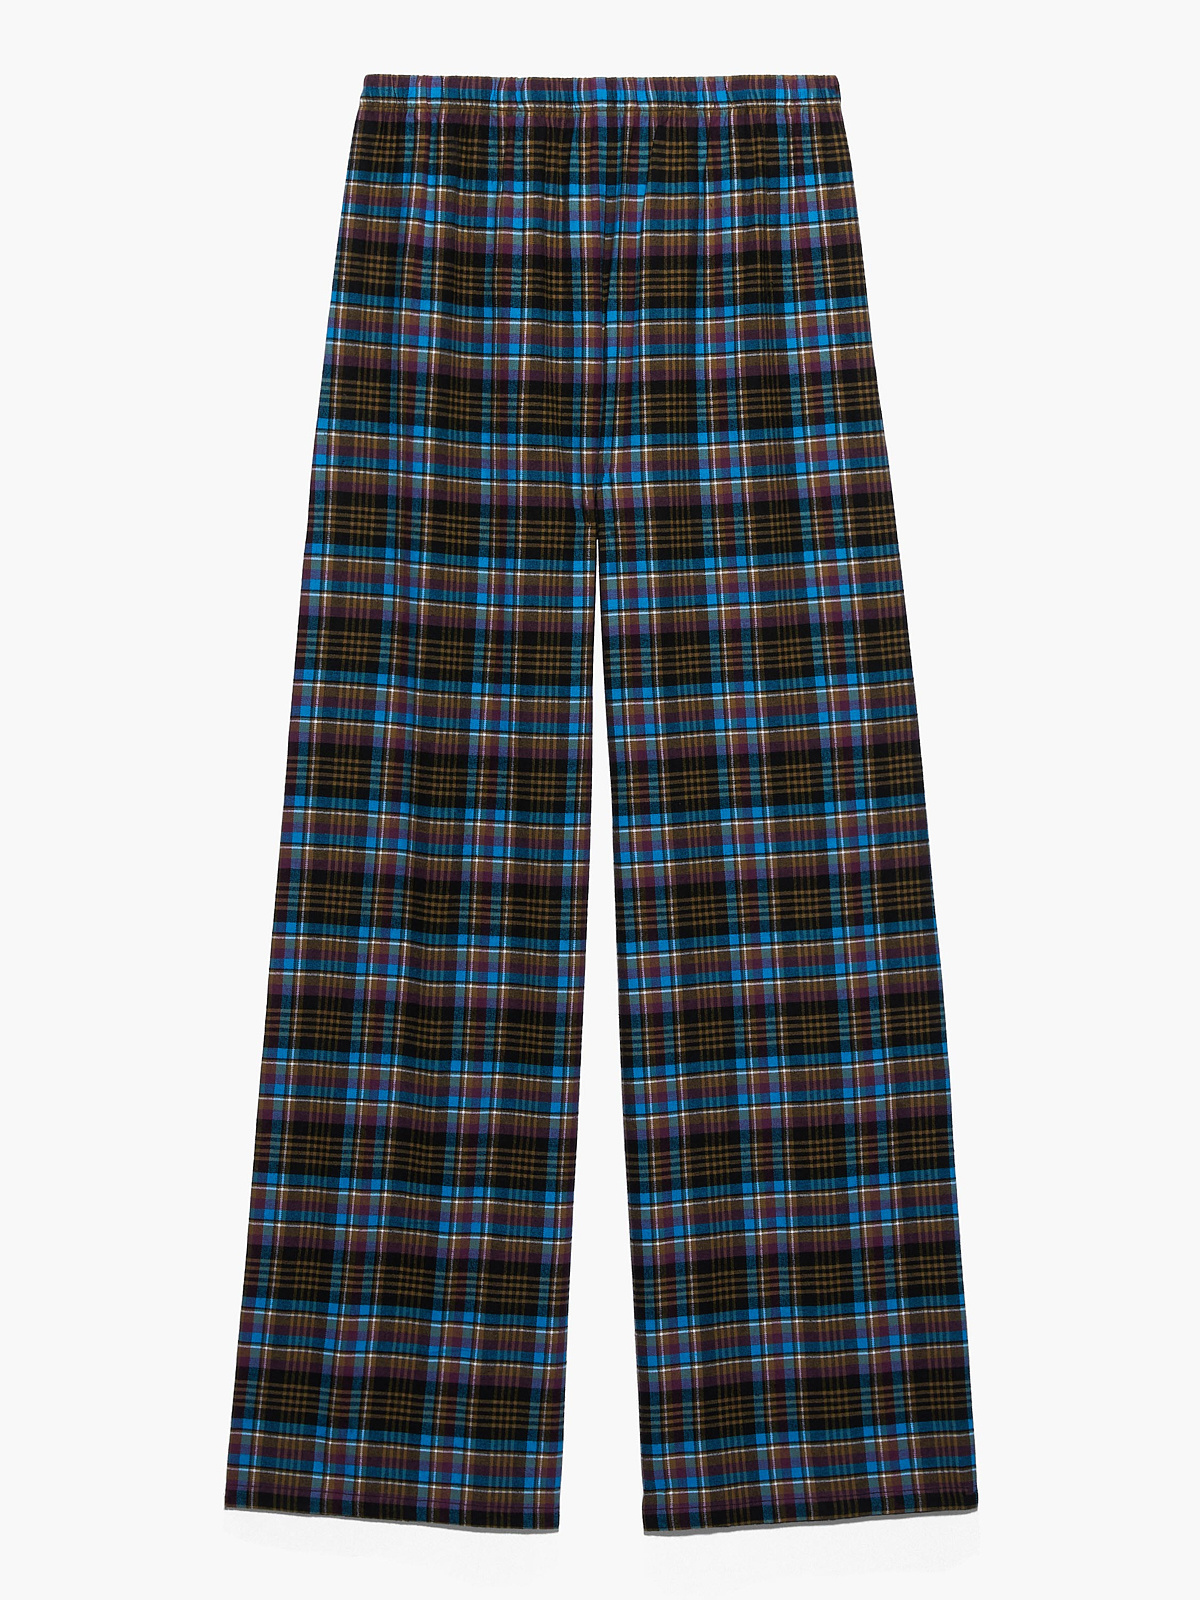 Rihanna Cotton And Flannel lace-up plaid open-back pajama pants on sale 3